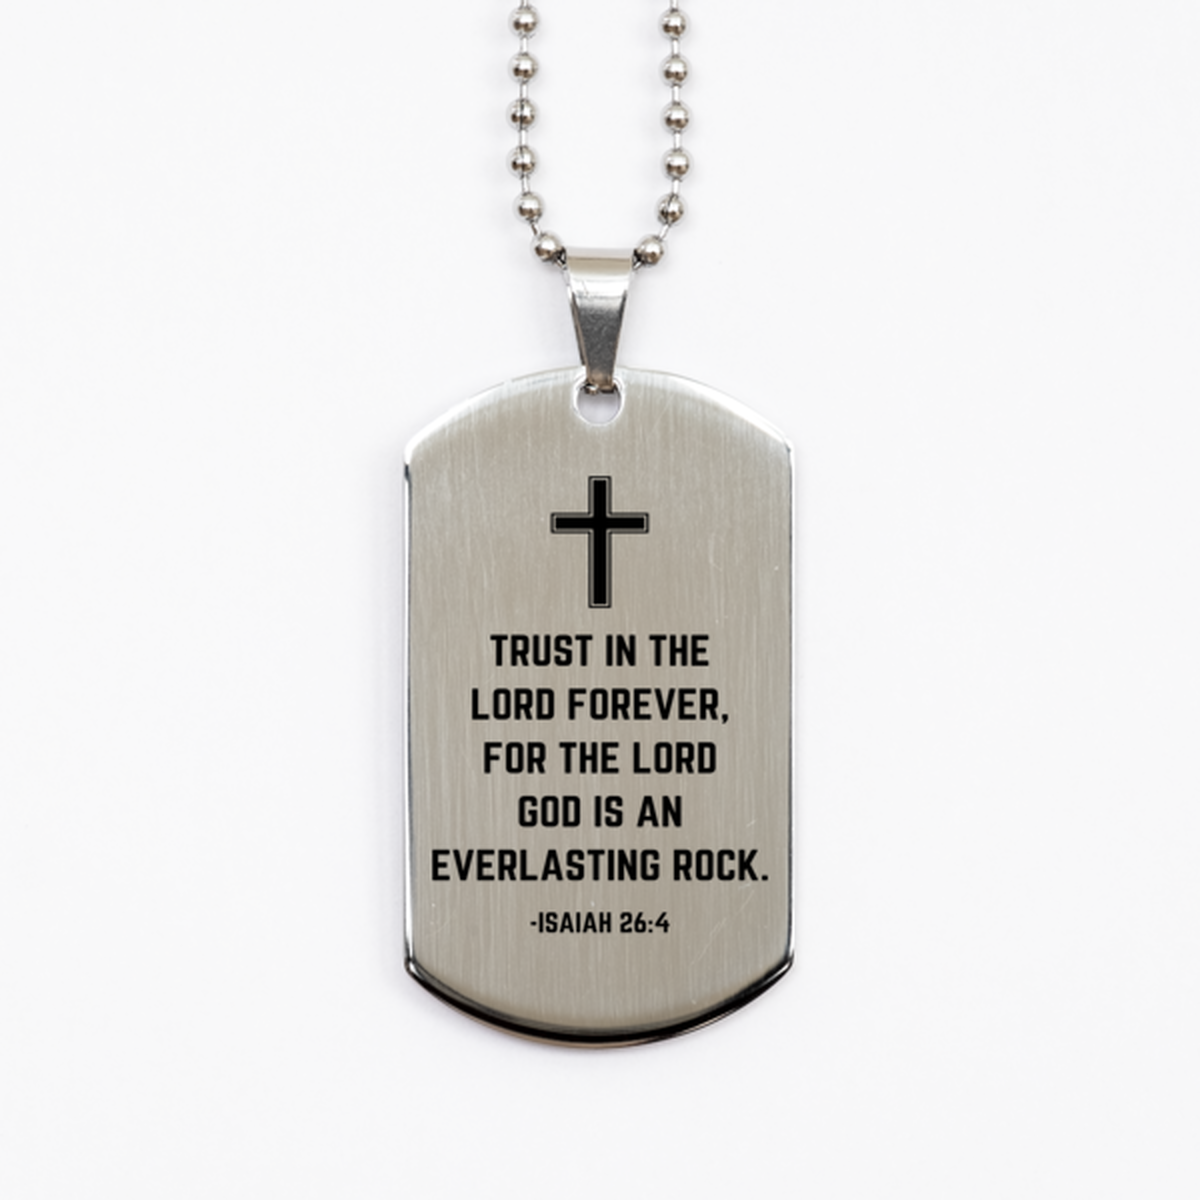 Baptism Gifts For Teenage Boys Girls, Christian Bible Verse Silver Dog Tag, Trust in the Lord forever, Confirmation Gifts, Bible Verse Necklace for Son, Godson, Grandson, Nephew